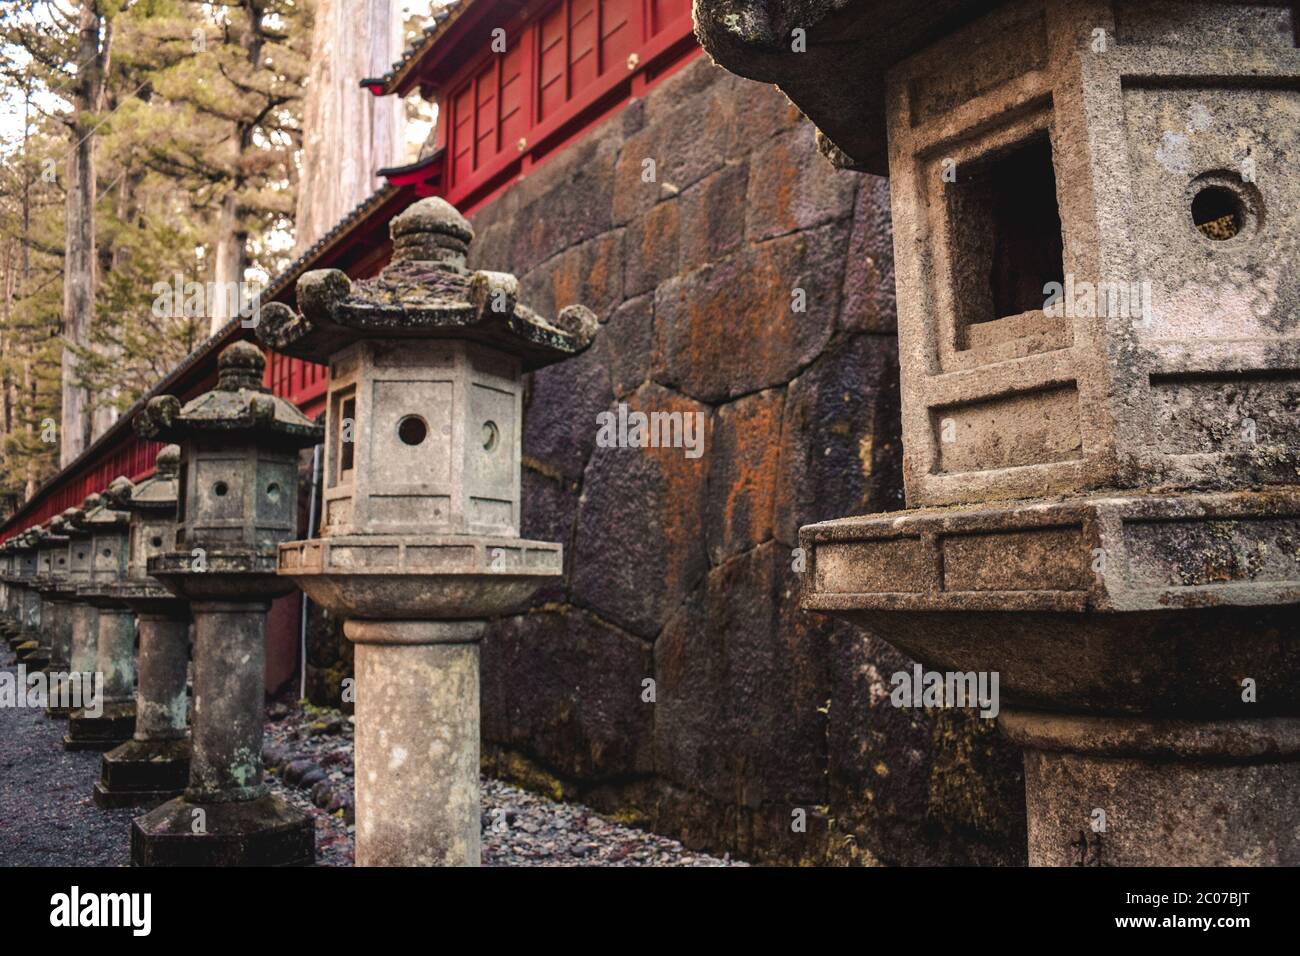 Japanese traditional stone lanterns in a row in Nikko Japan Stock Photo